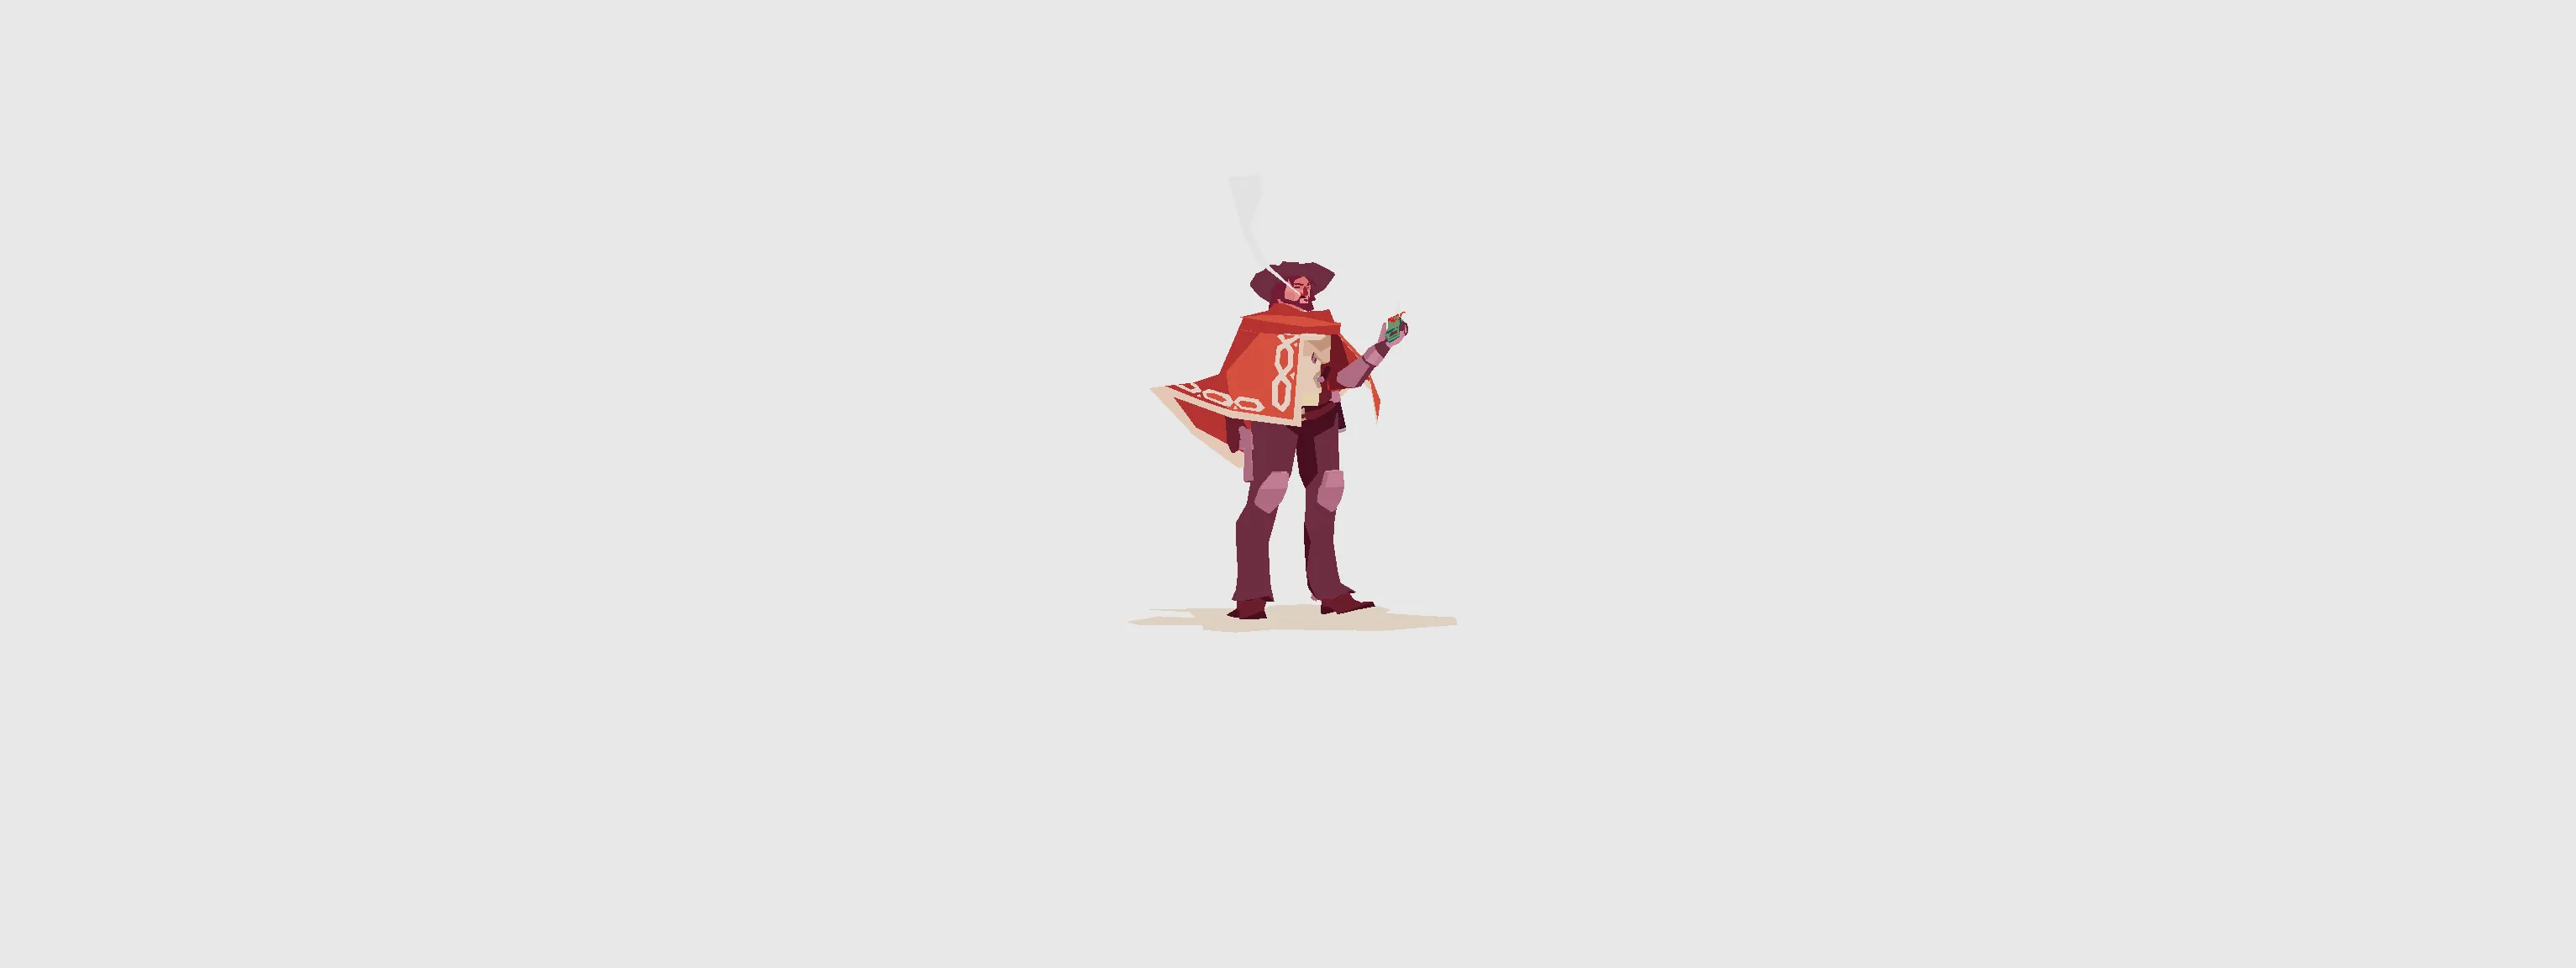 low poly mccree